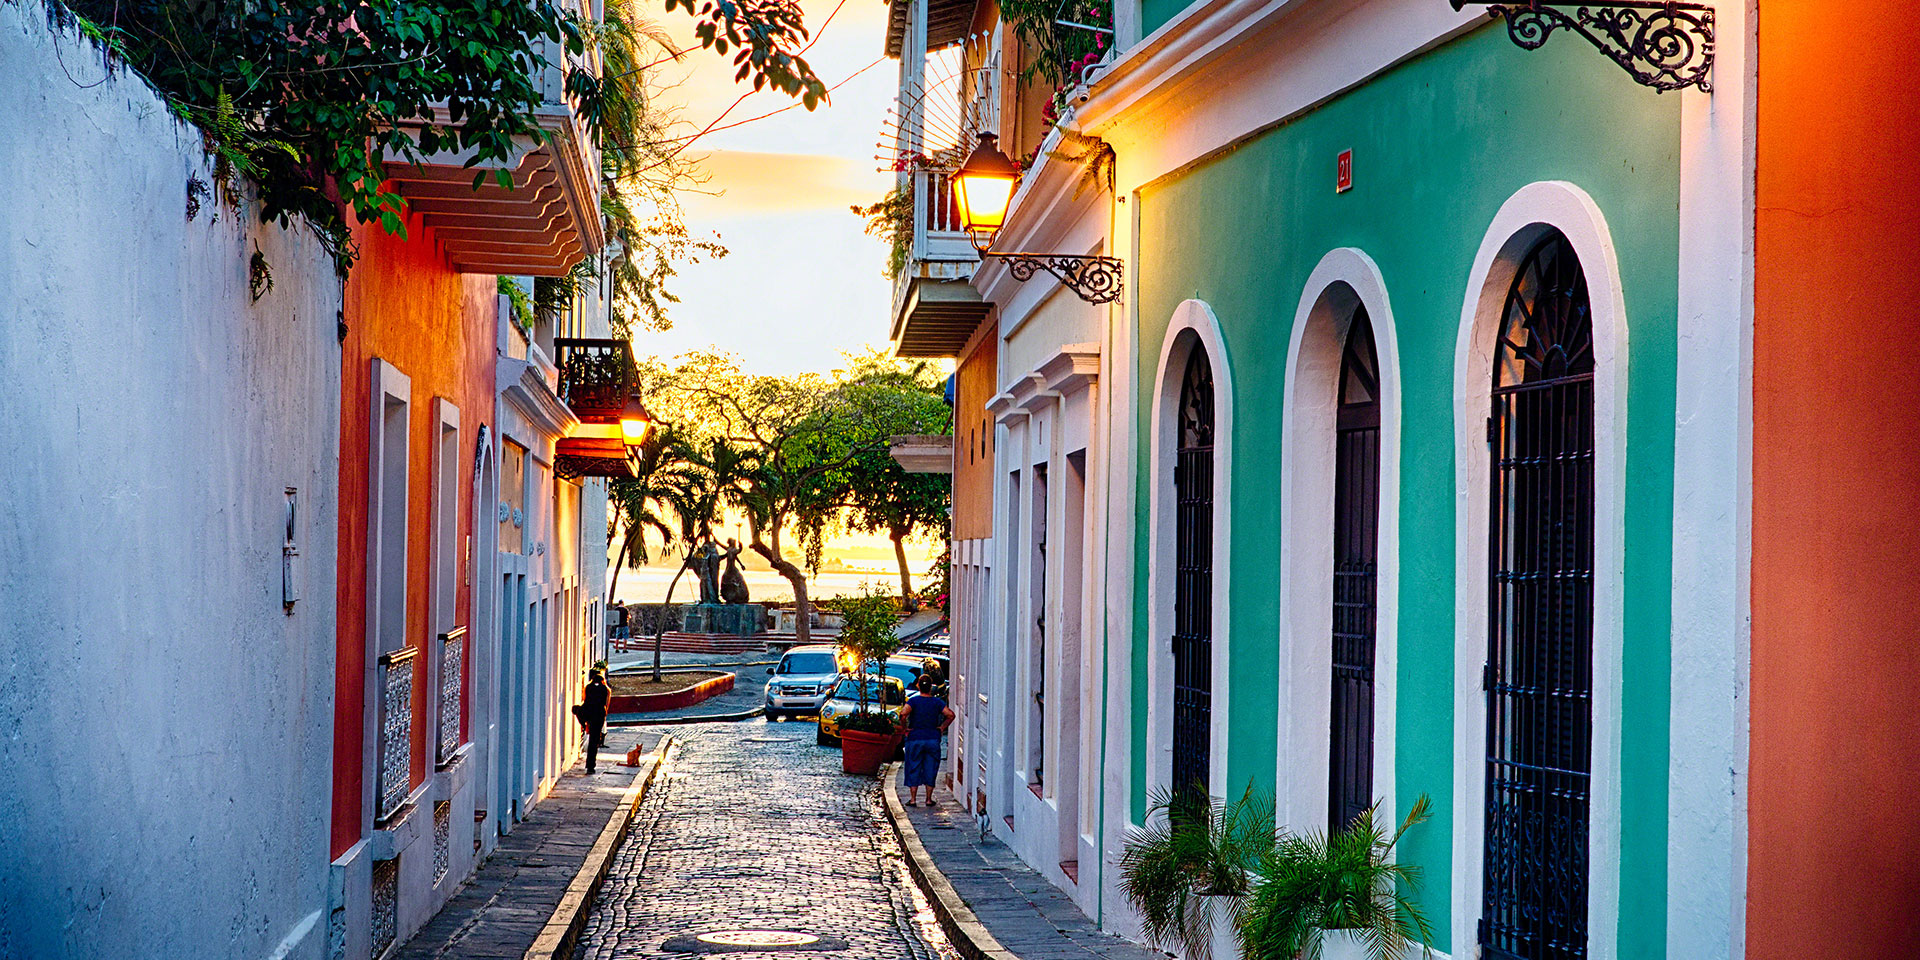 Old San Juan, Puerto Rico: Haven for